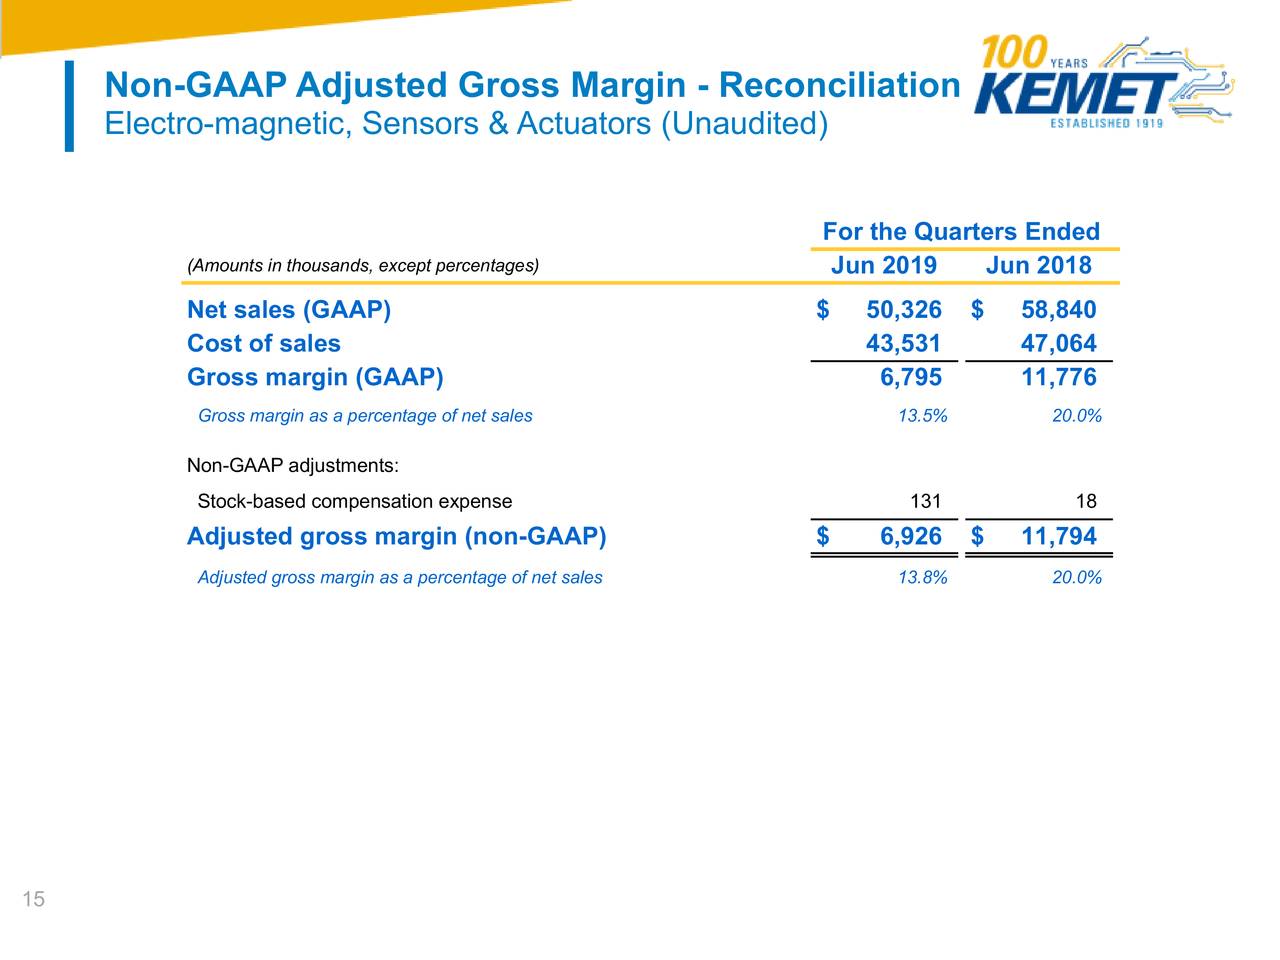 Non-GAAP Adjusted Gross Margin - Reconciliation